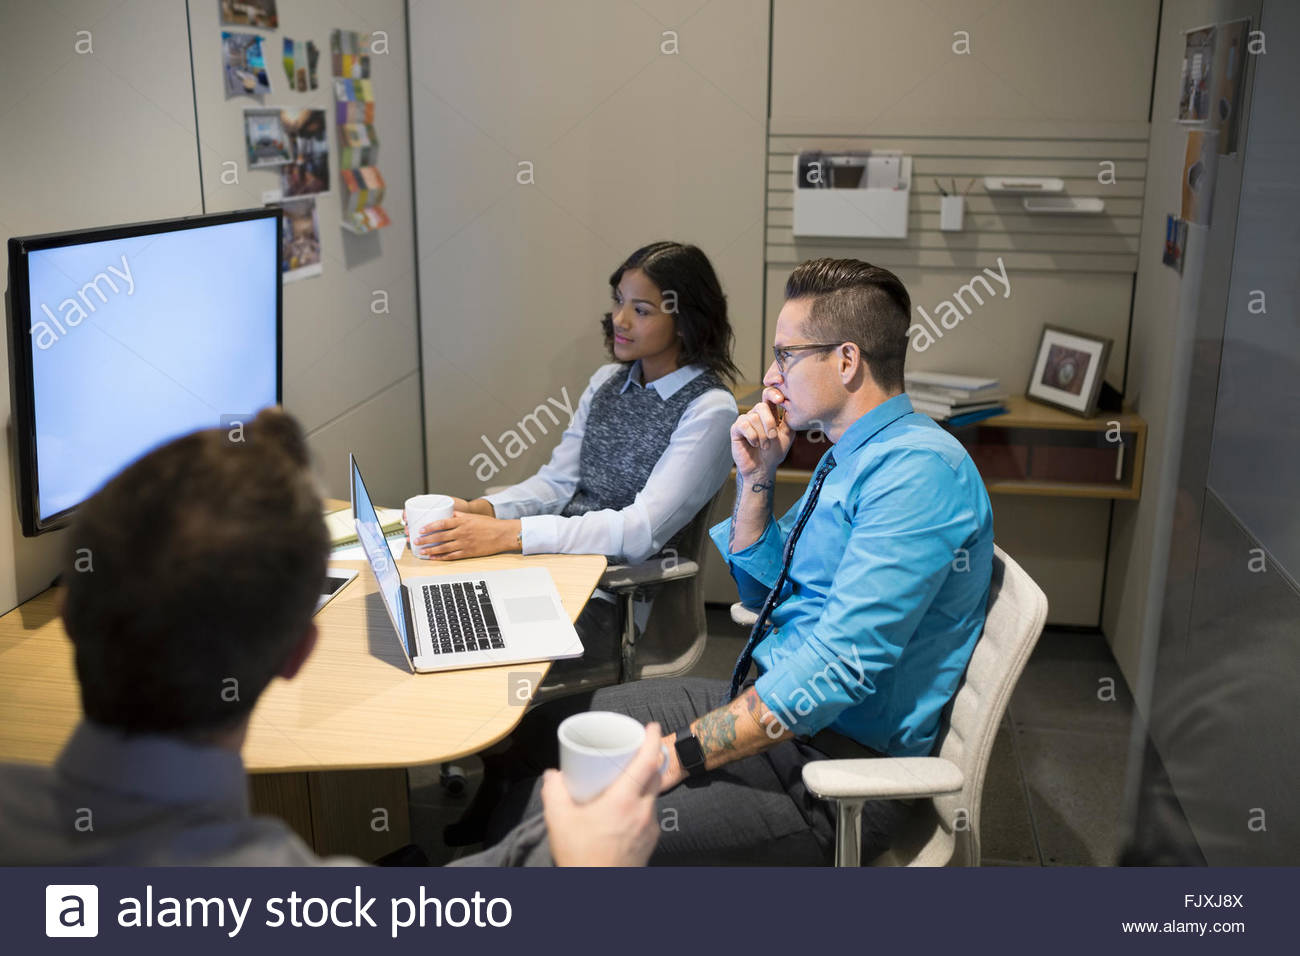 Business people watching monitor in meeting Stock Photo